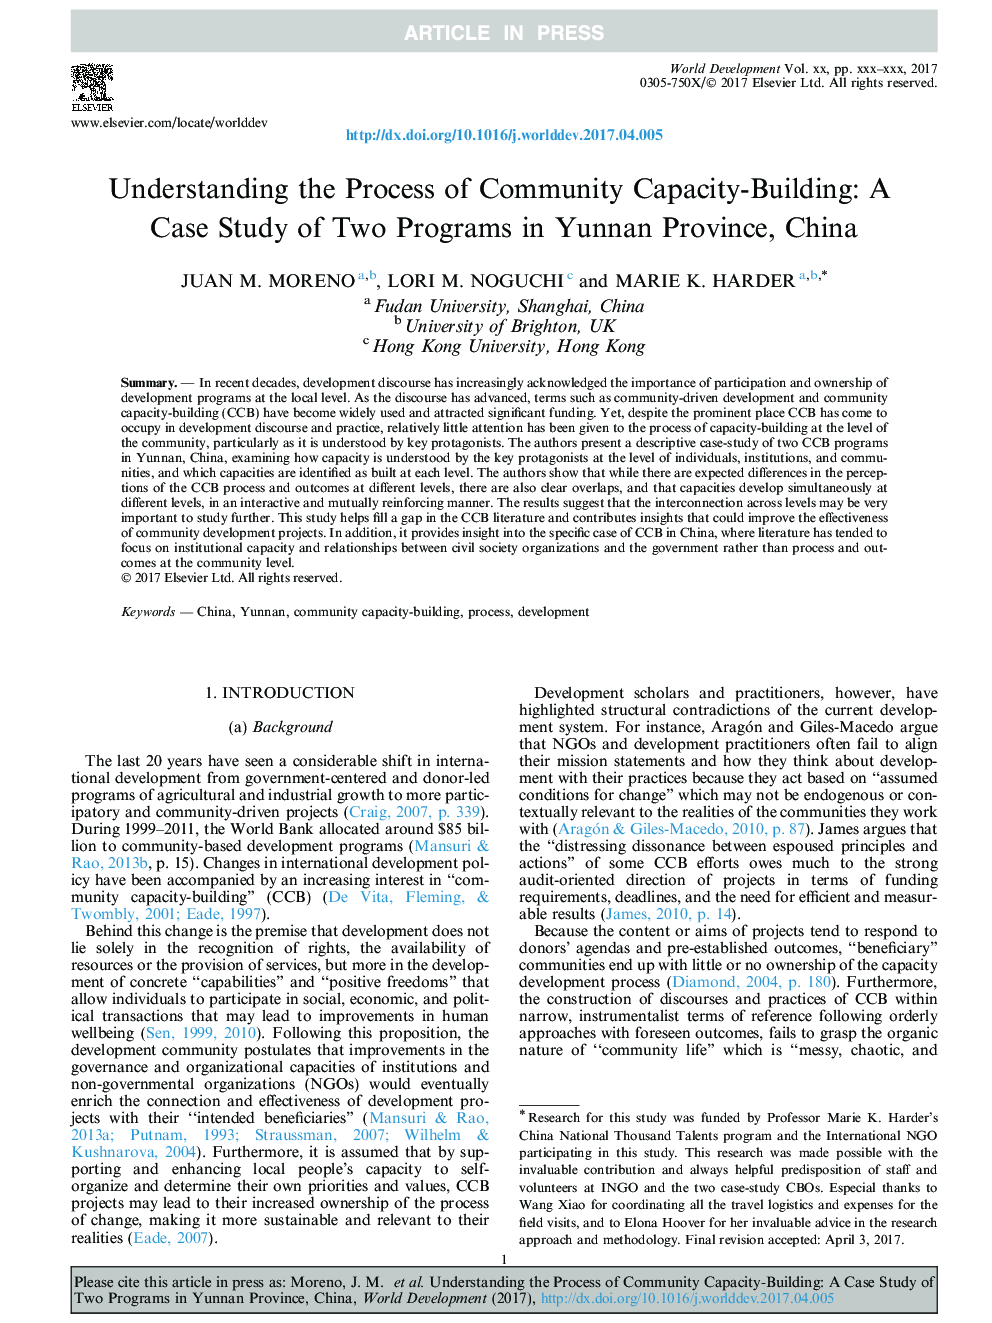 Understanding the Process of Community Capacity-Building: A Case Study of Two Programs in Yunnan Province, China